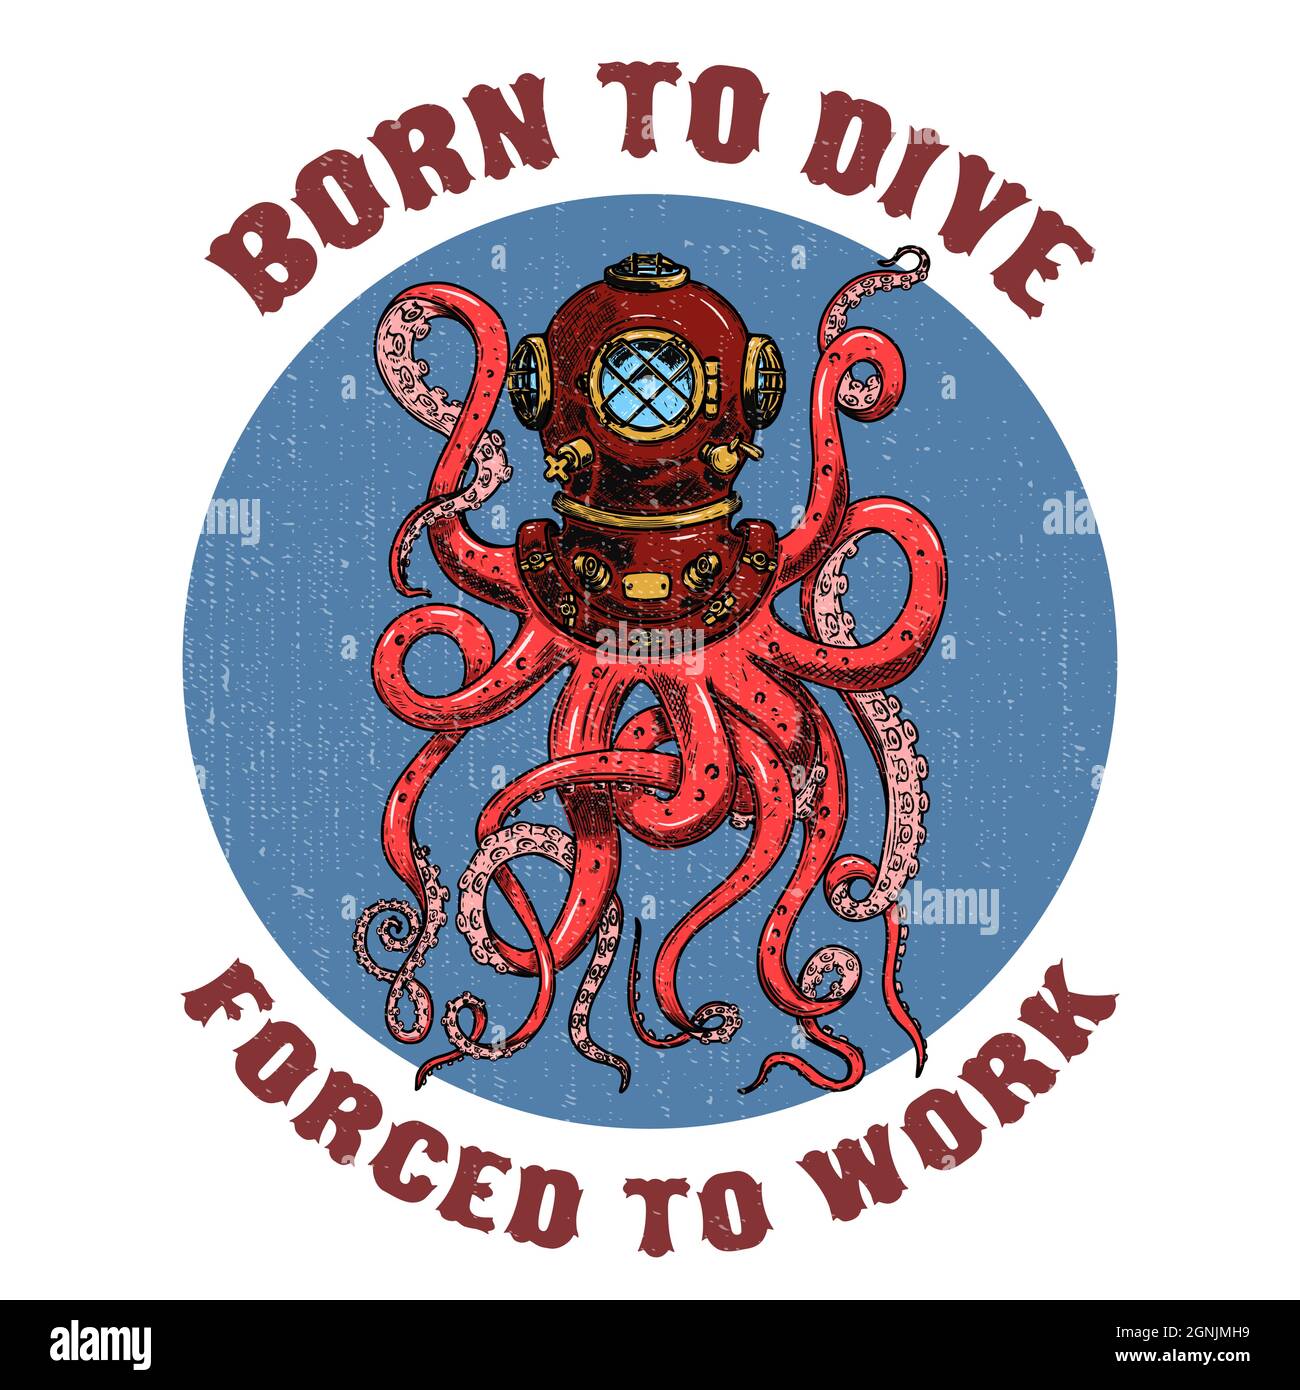 Born to dive forced to work .diver helmet with octopus tentacles on grunge background. Design elements for poster, t-shirt. Vector illustration. Stock Vector